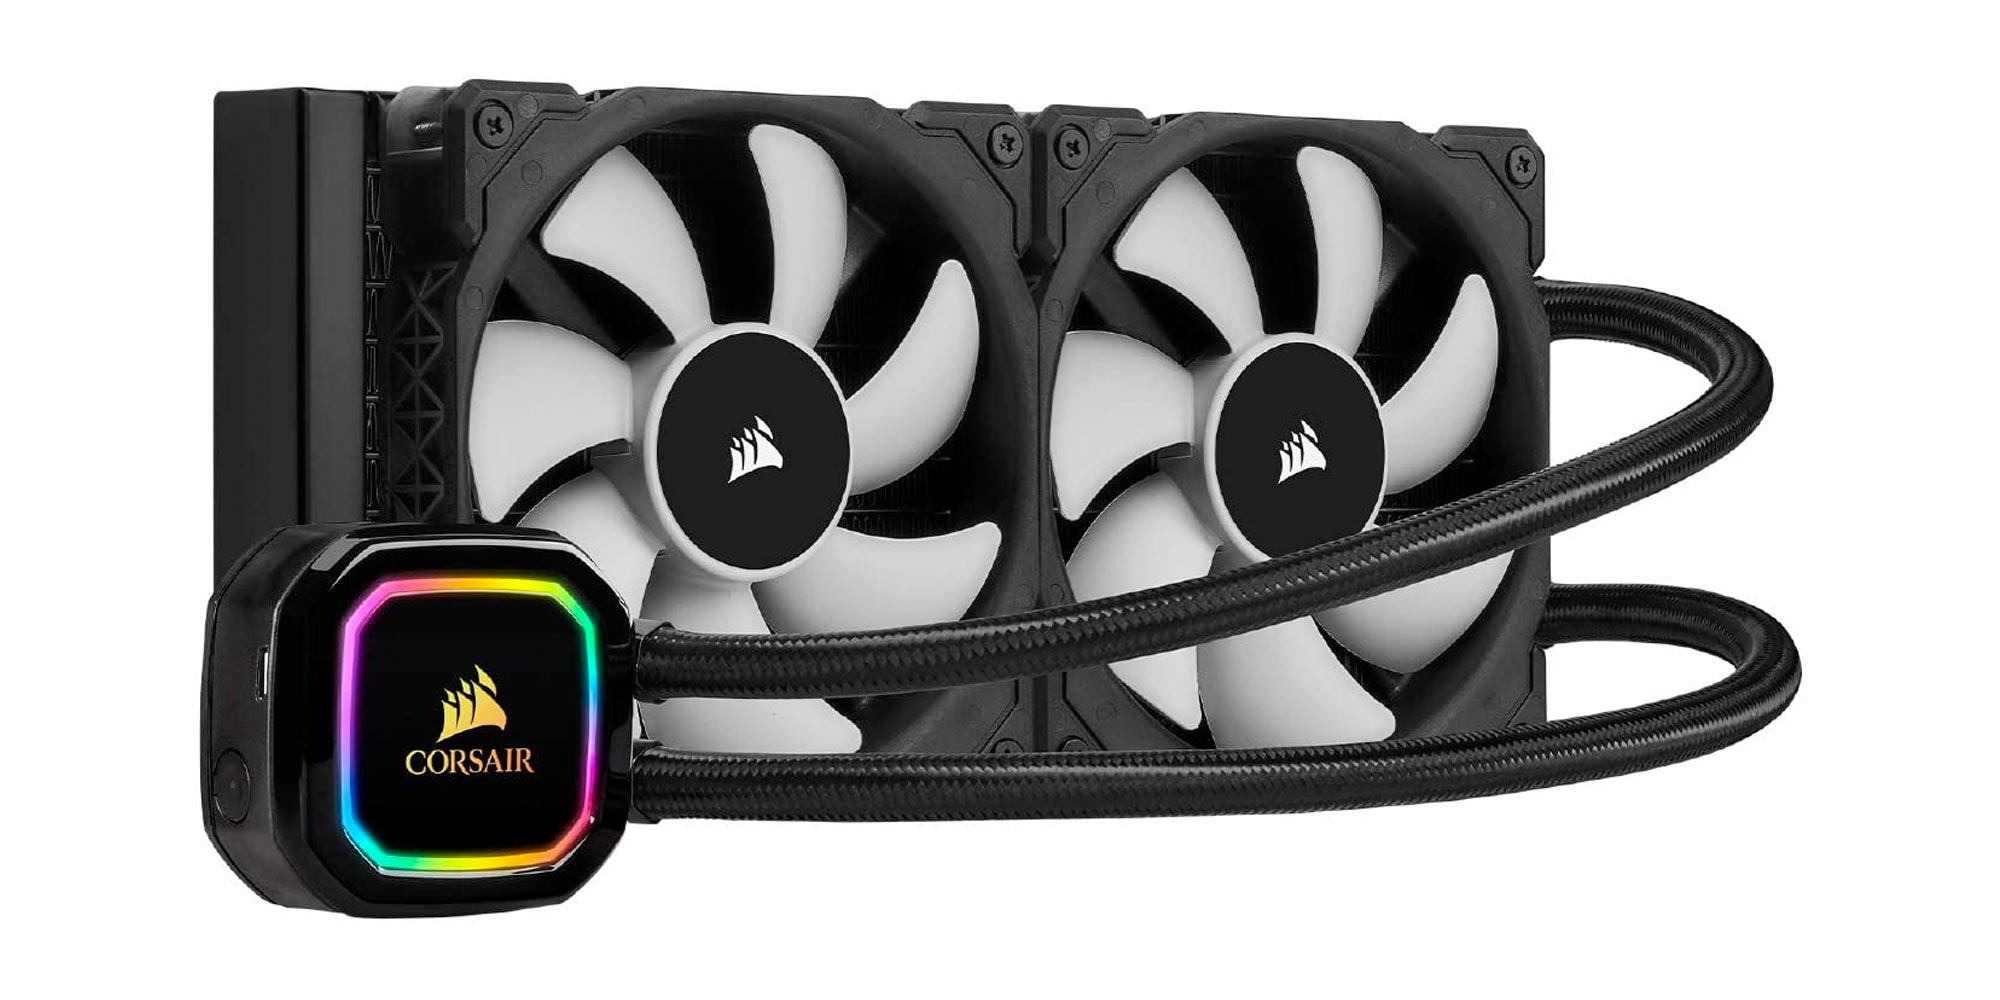 Corsair AIO Cooler: Superior Cooling for Ultimate Gaming Performance